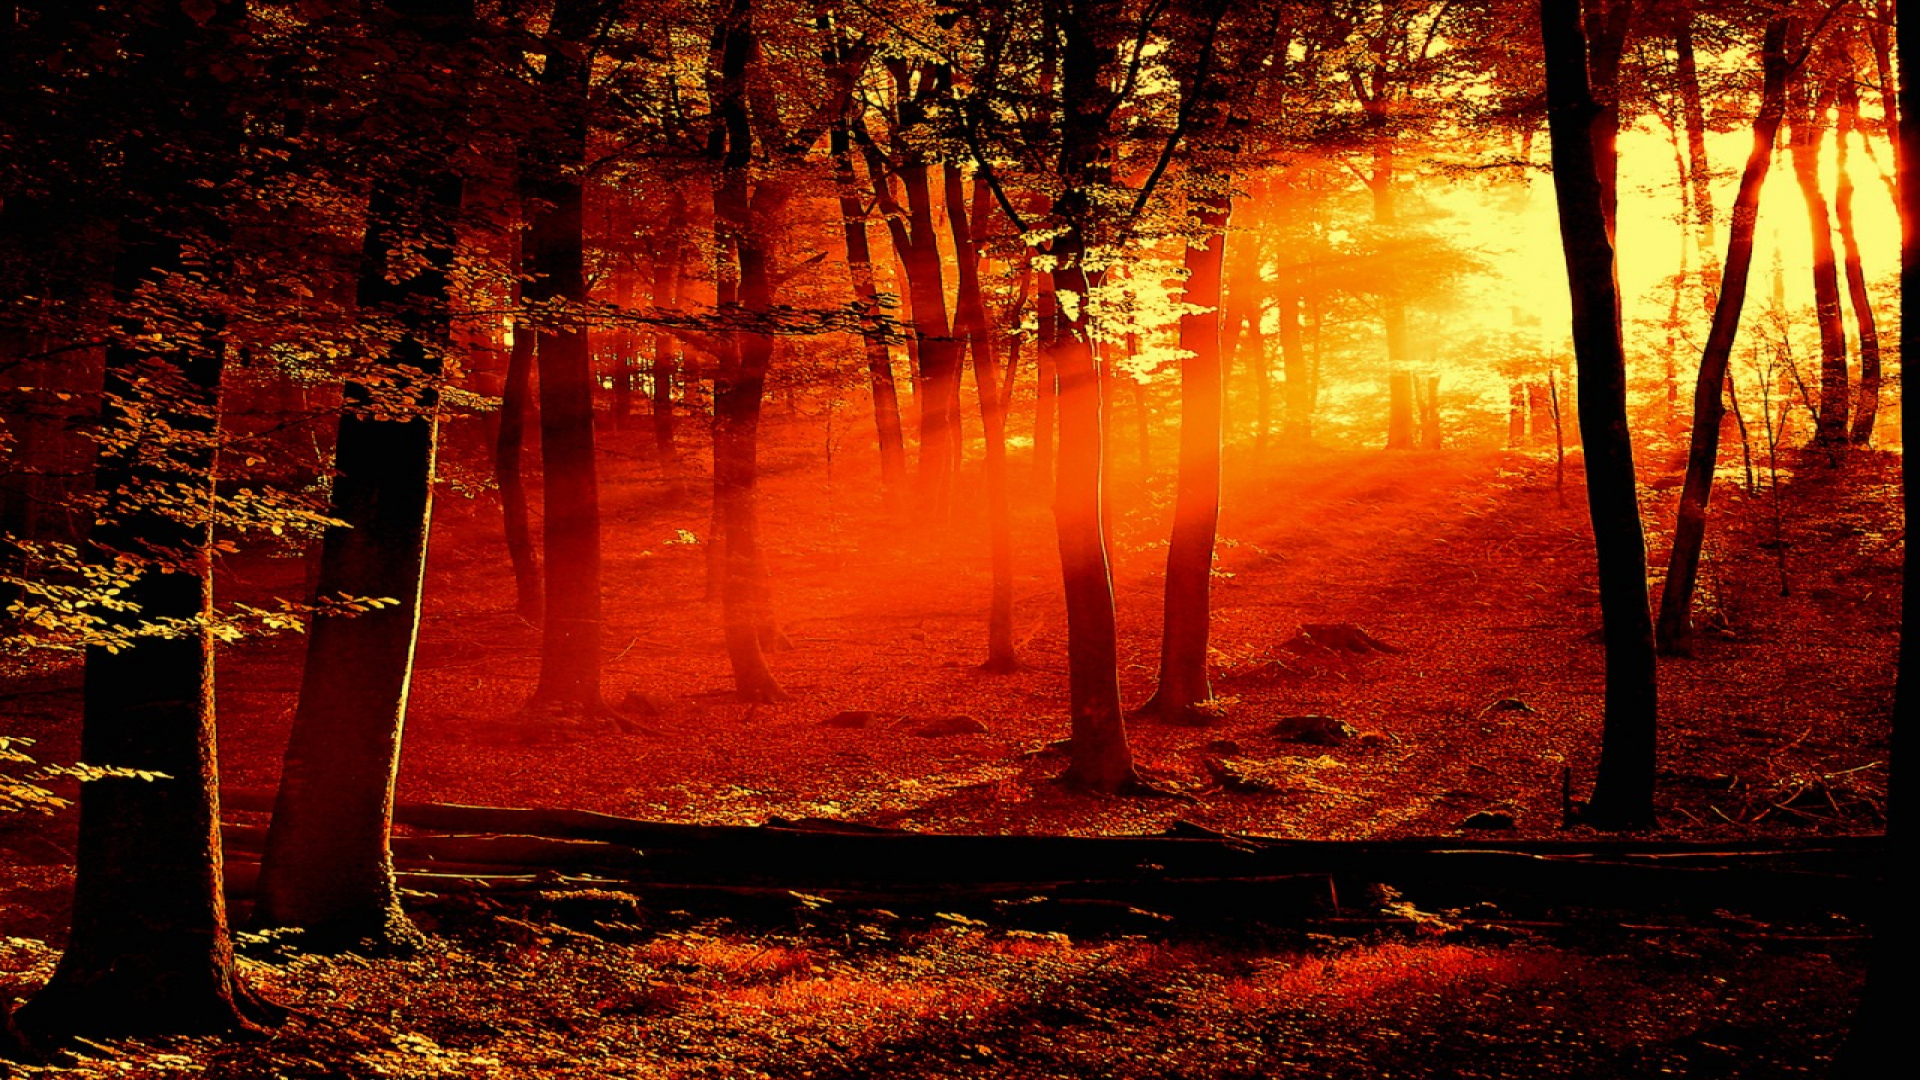 Sun Setting In A Forest - HD Wallpaper 